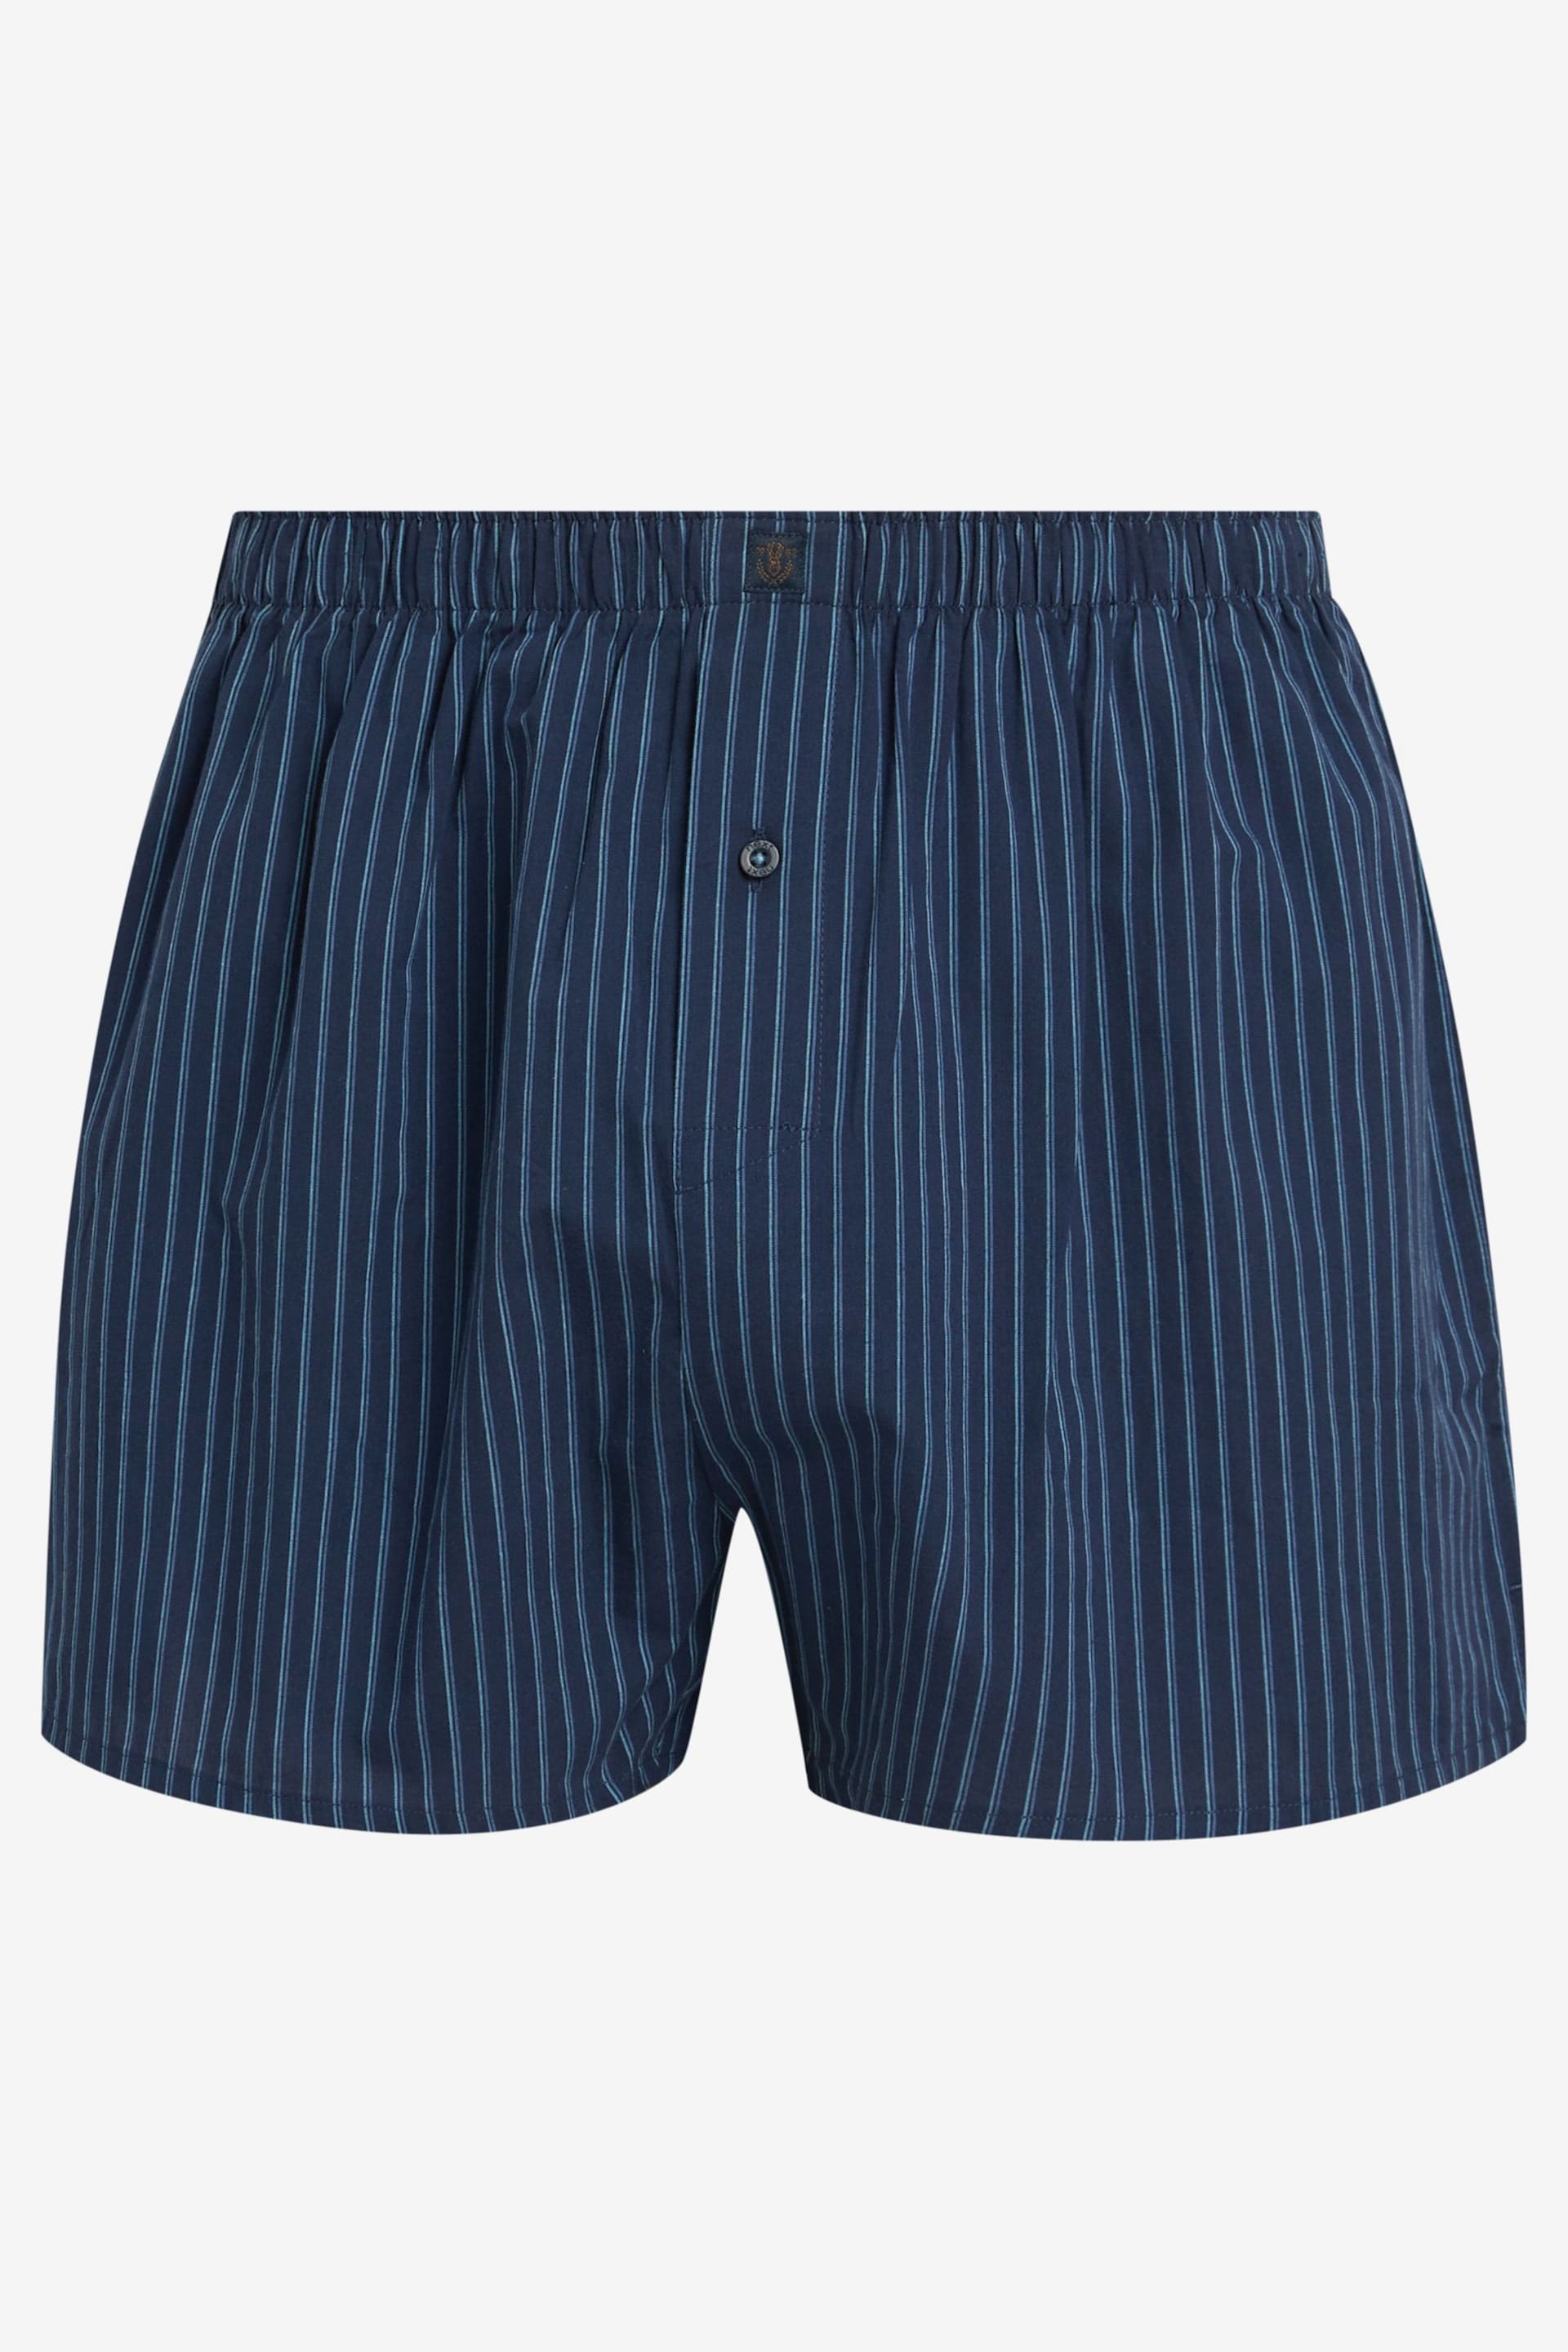 Navy 8 pack Woven Pure Cotton Boxers - Image 5 of 7